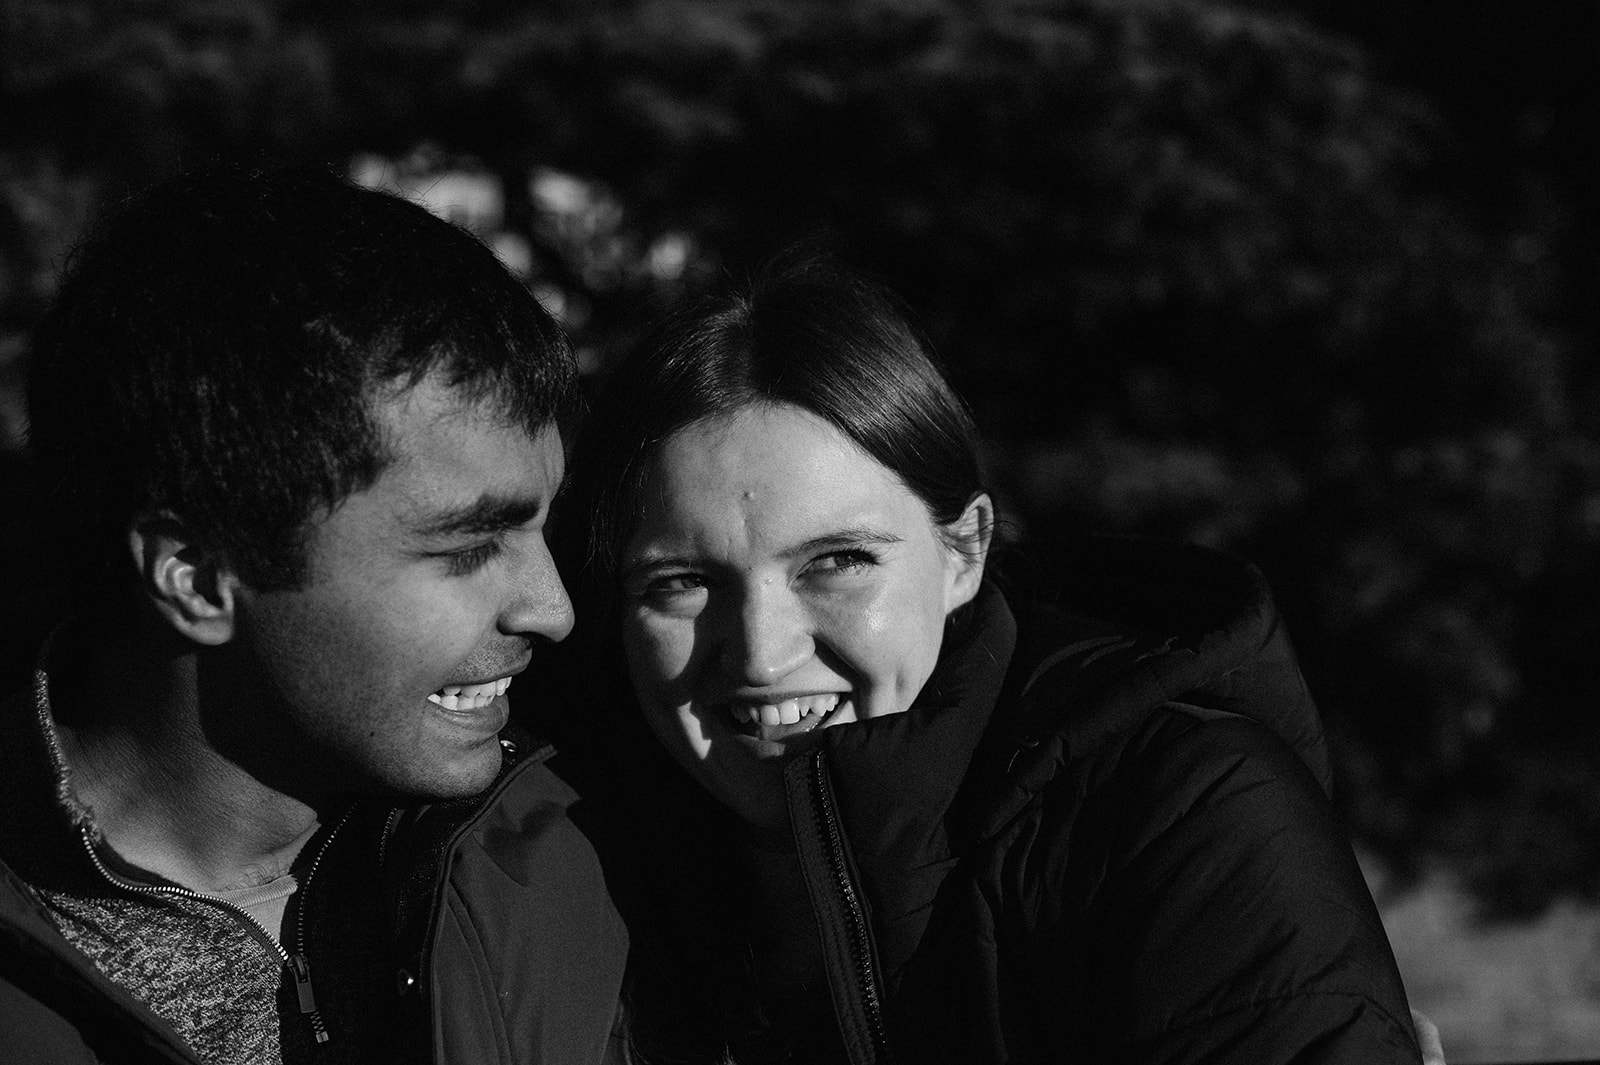 Close up picture in black and white of couple's faces close together smiling.